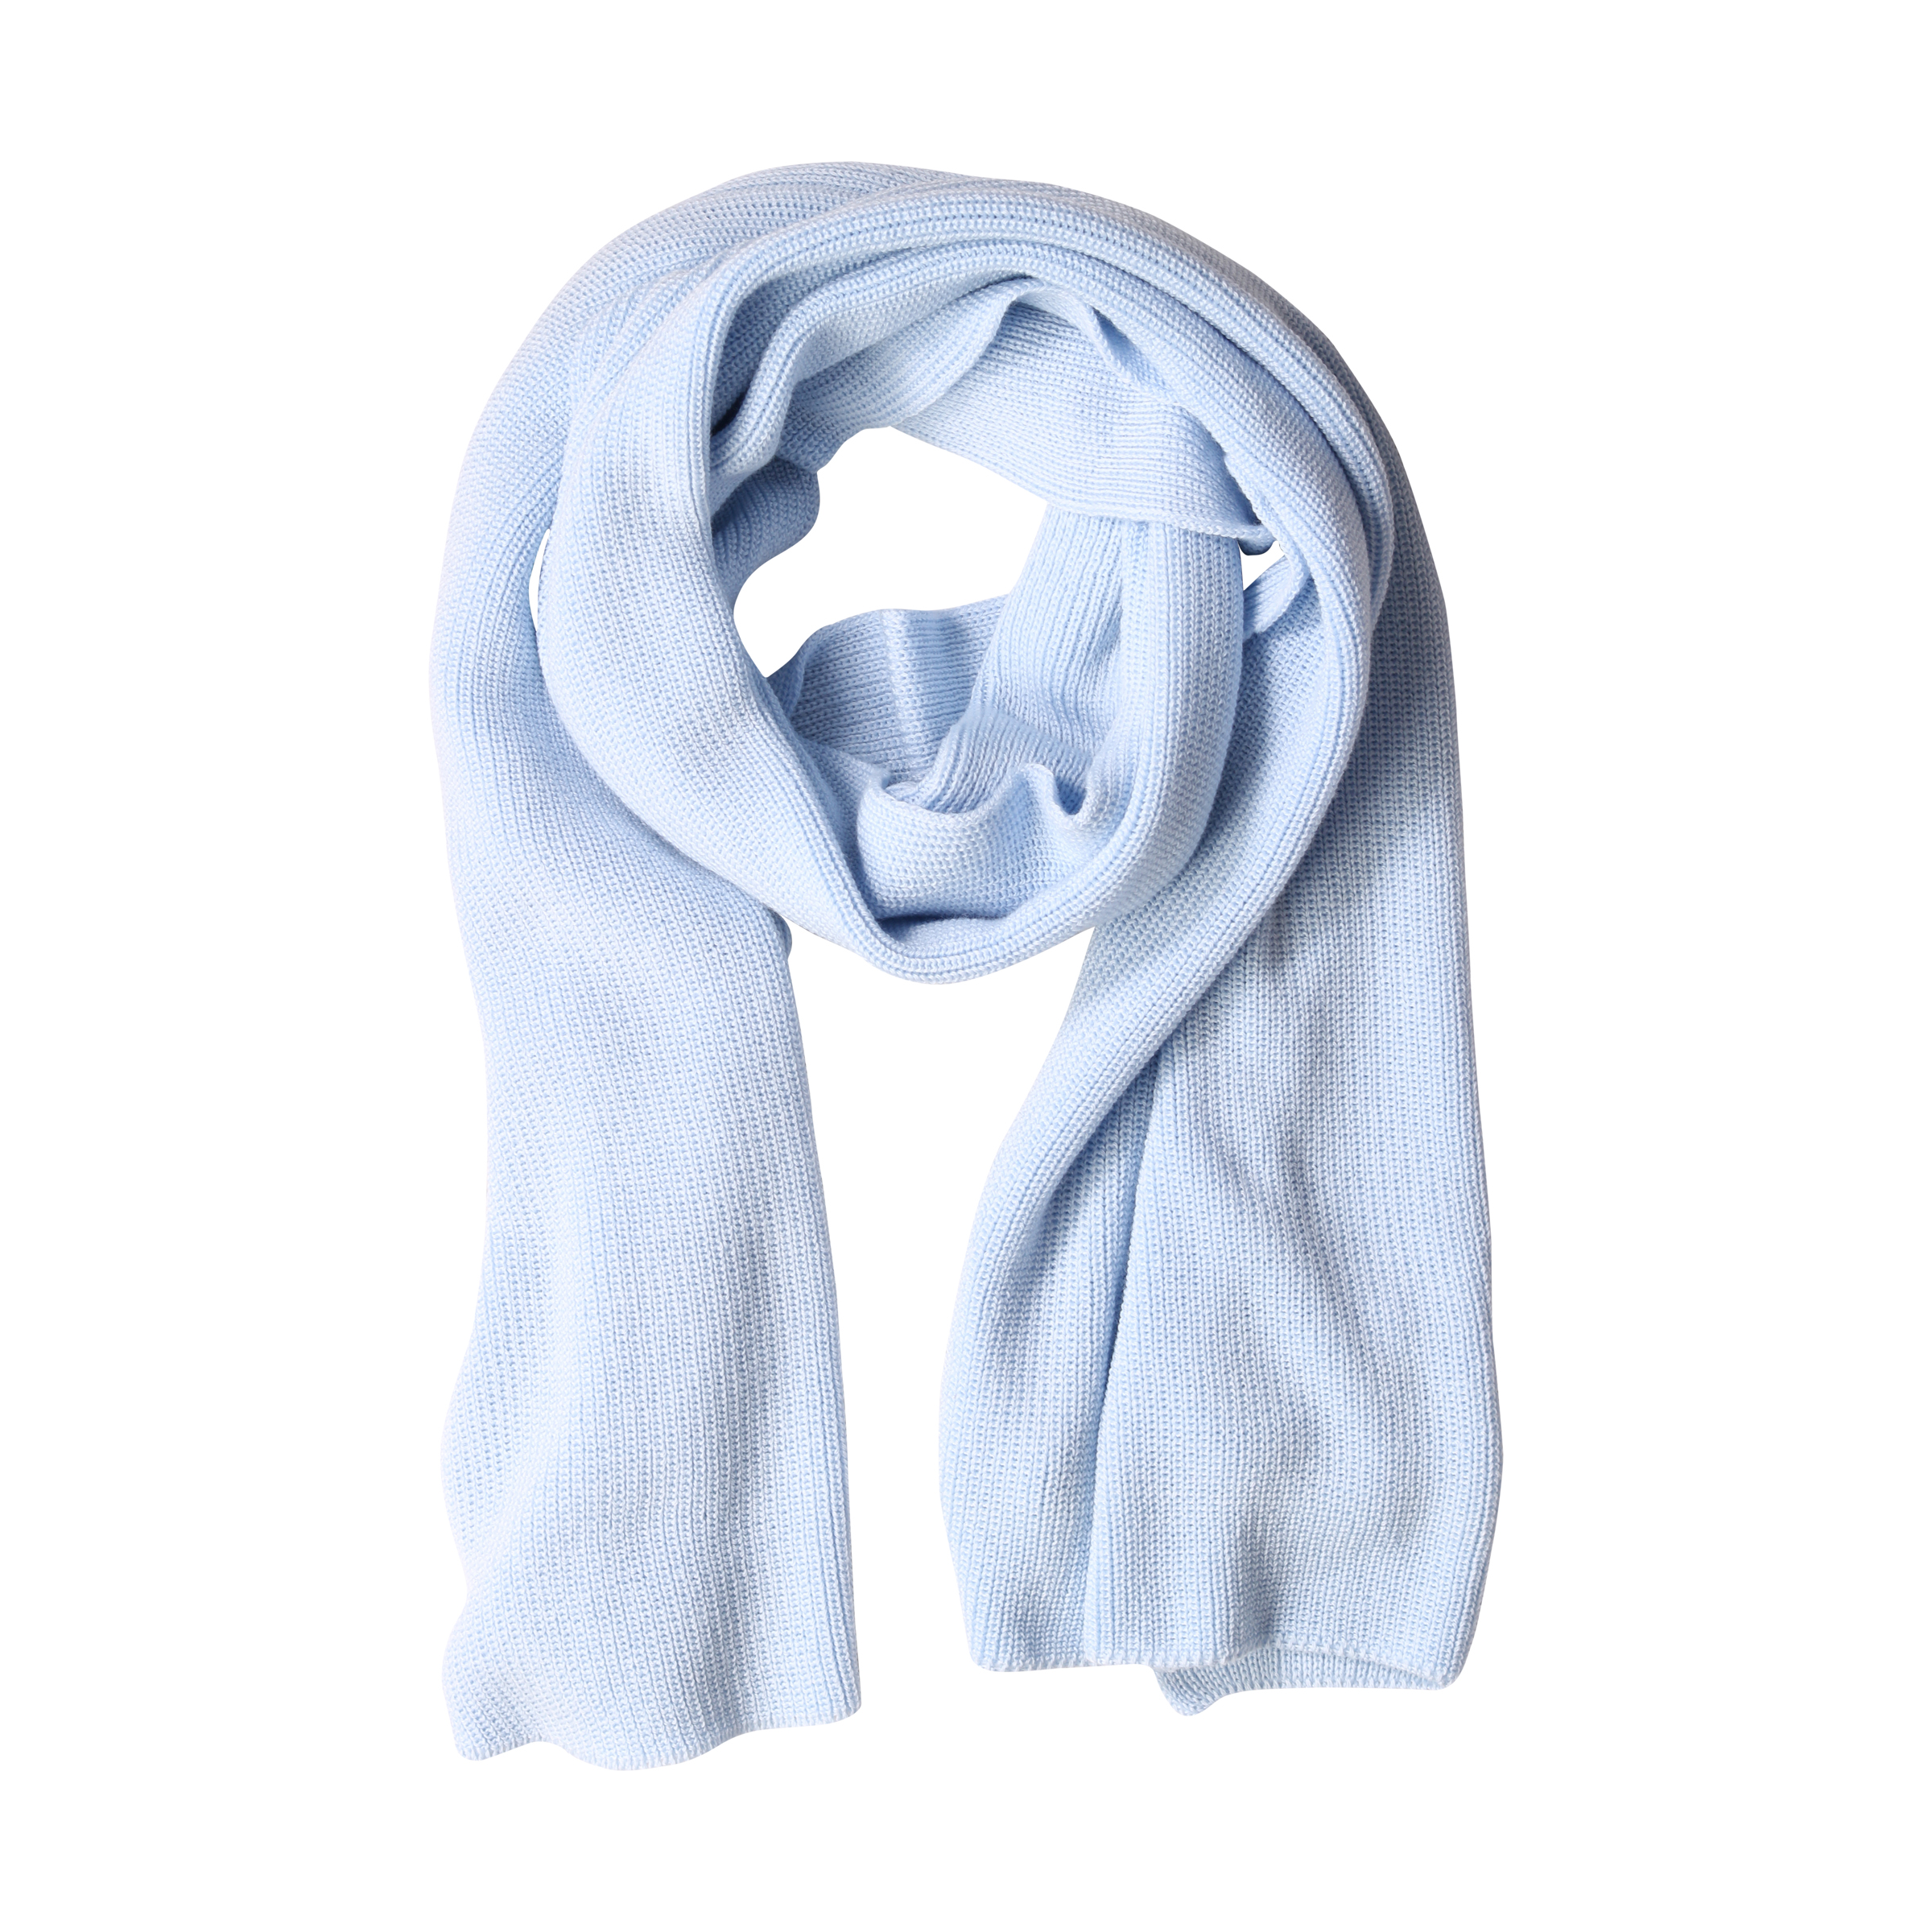 HANNES ROETHER Knit Scarf in Light Blue